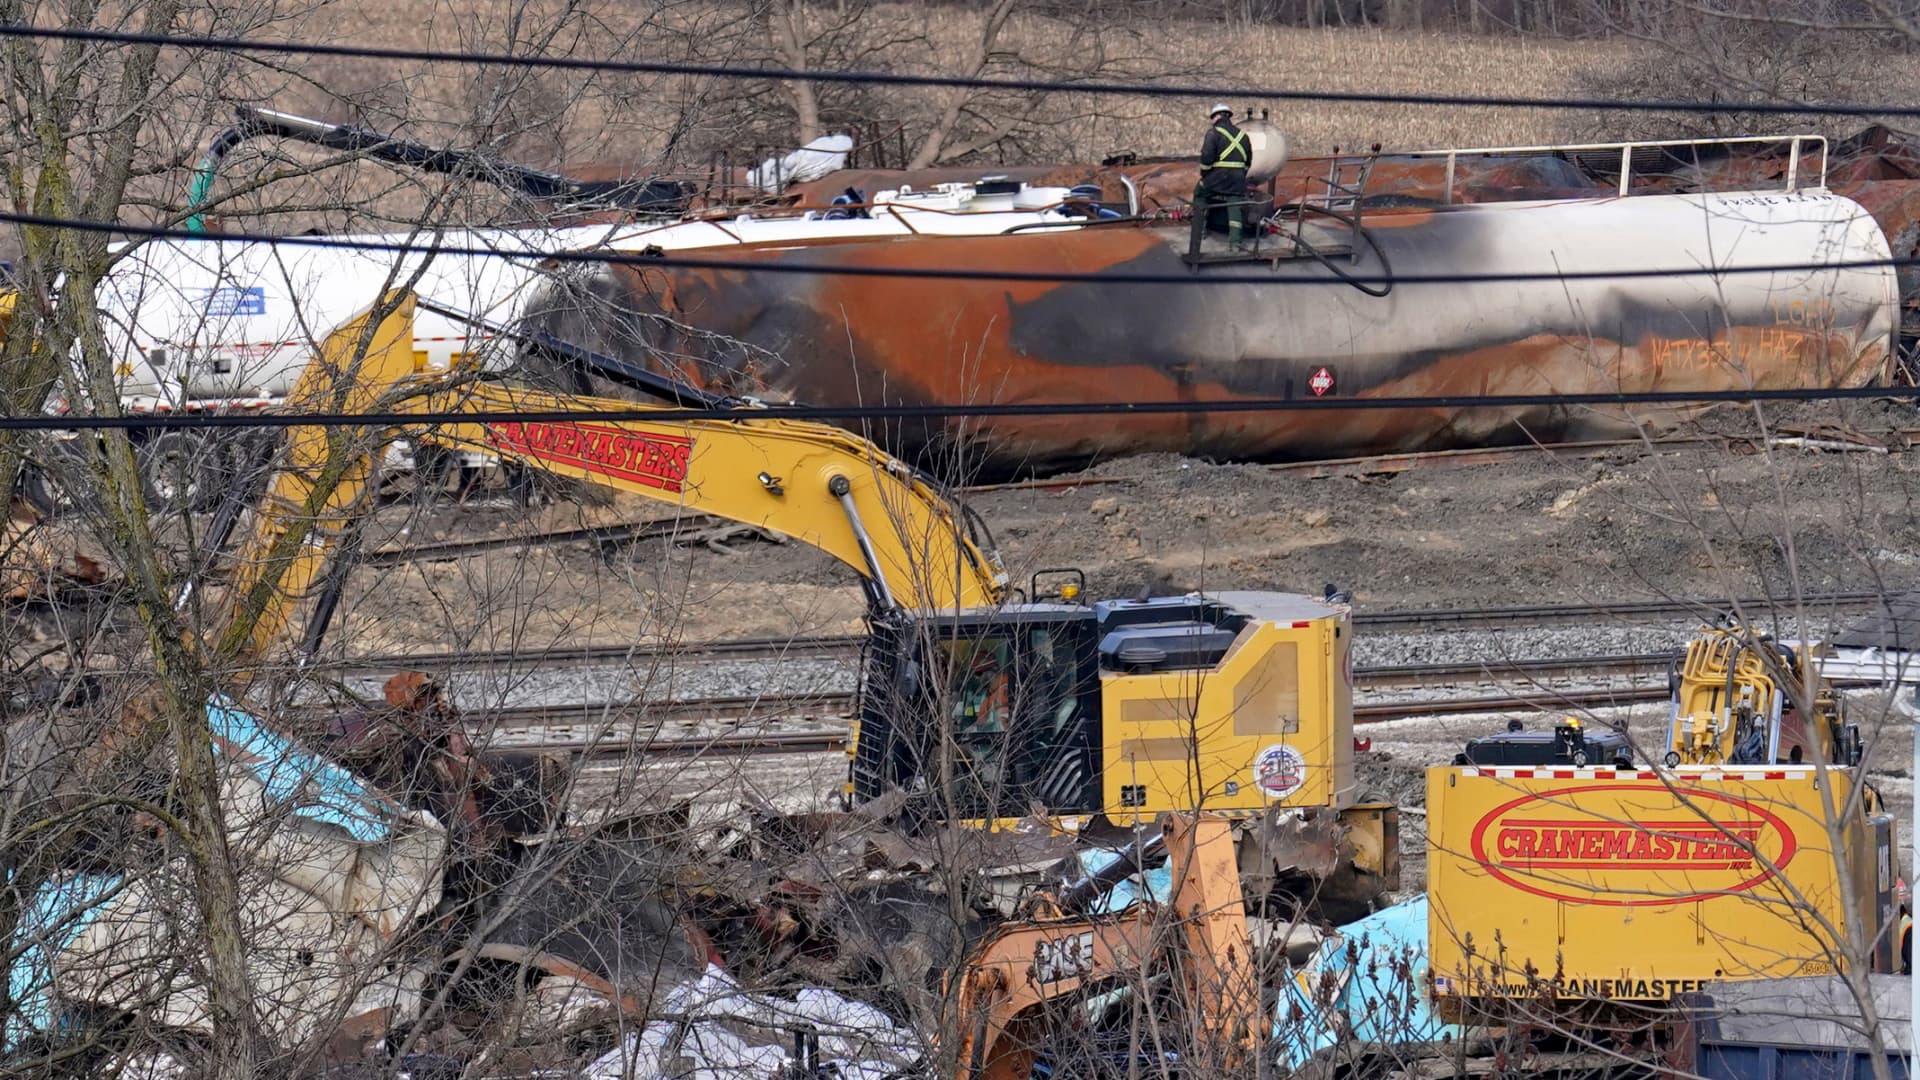 Feds point to overheated wheel bearing in report on Ohio train derailment